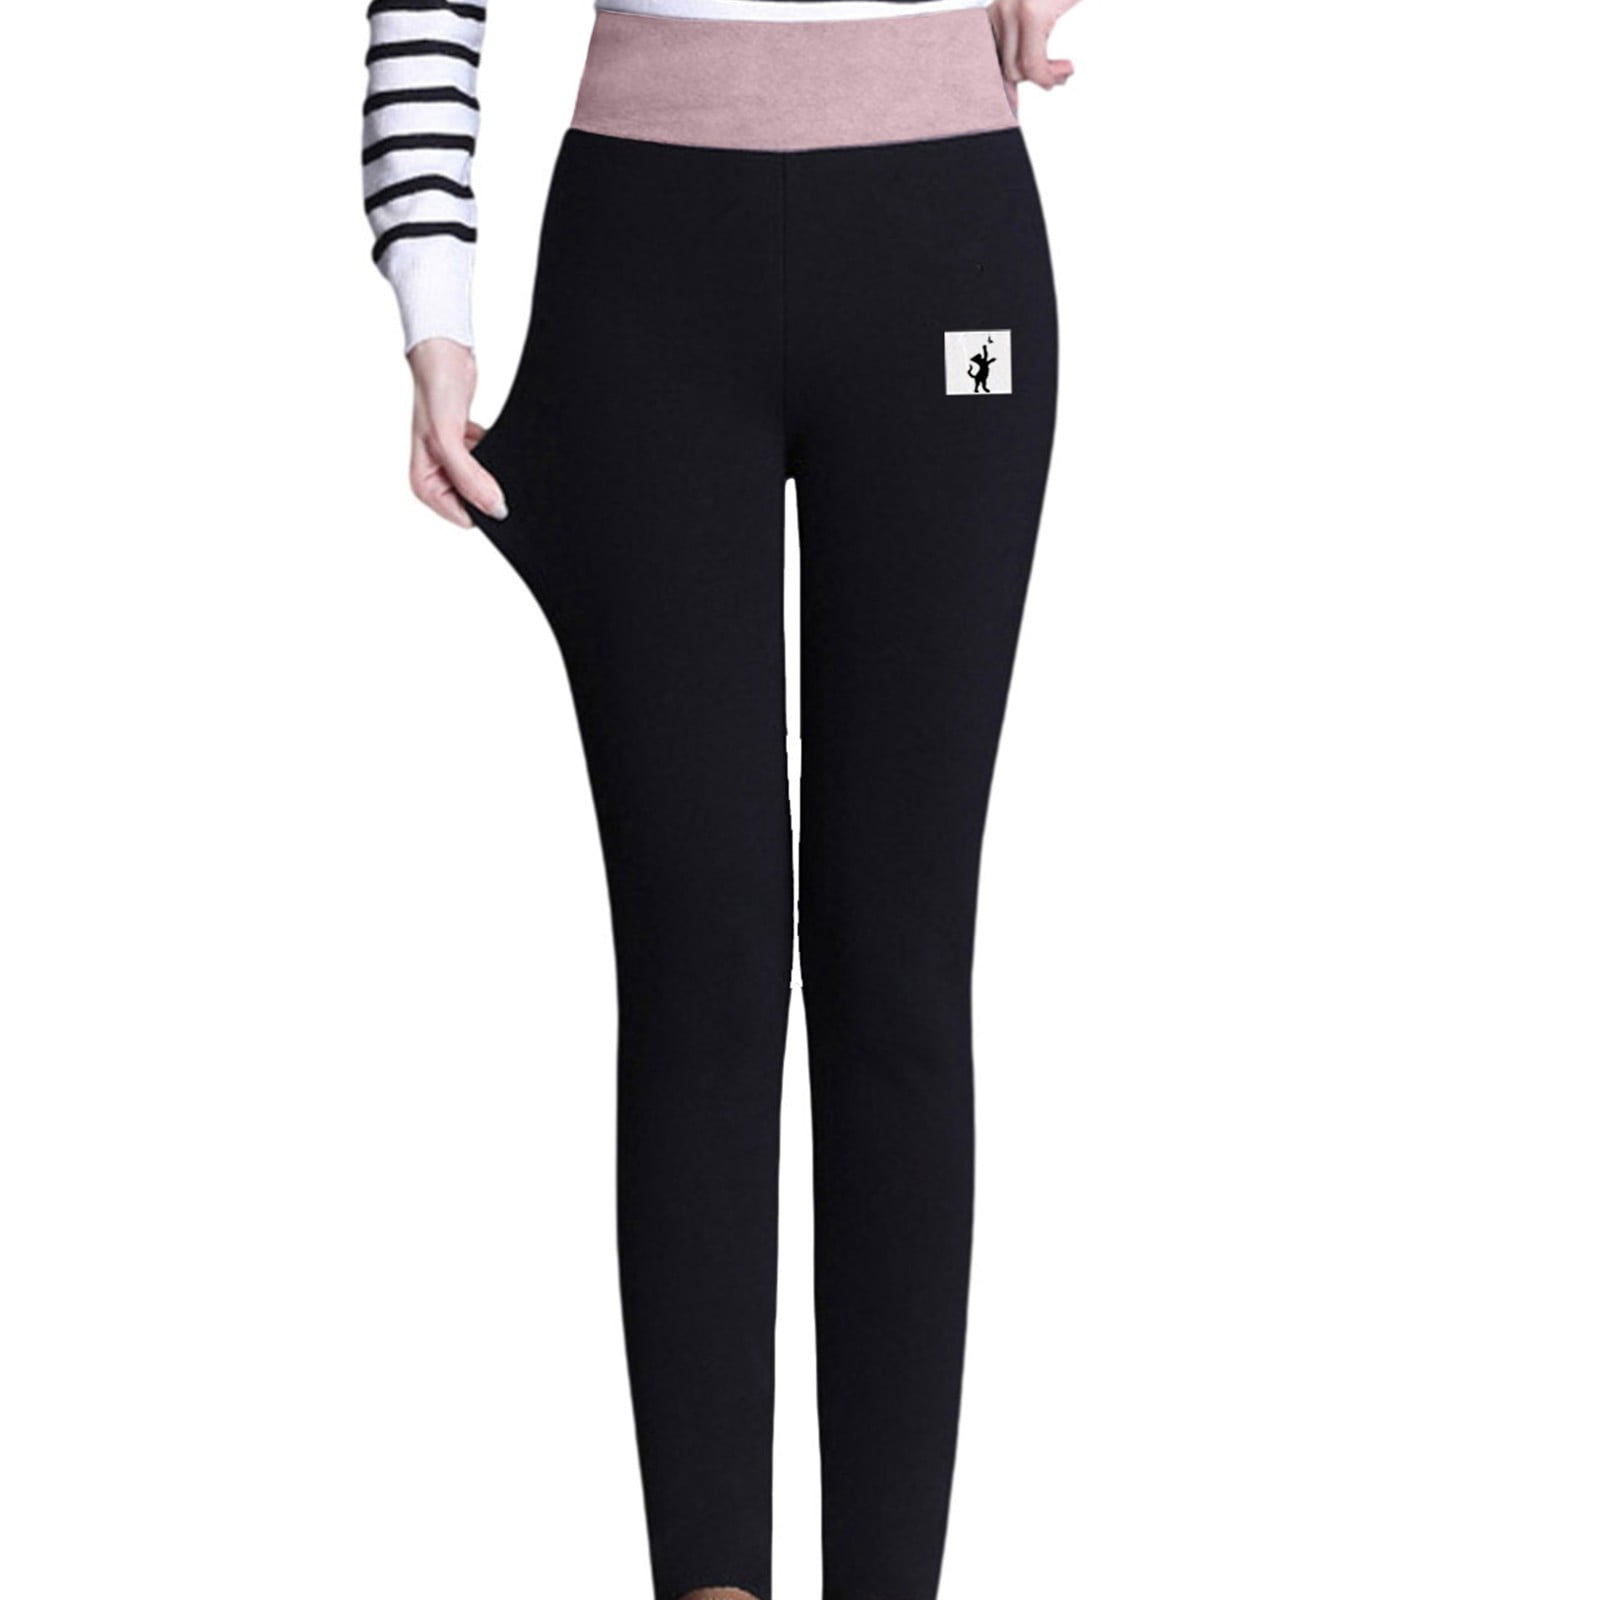  Fleece Lined Leggings Women Tall Long High Waisted Slim  Butterfly Tights Thermal Velvet Winter Sherpa Lined Sweatpantsplus Size  Tights for Women 4X GY1 One Size : Sports & Outdoors